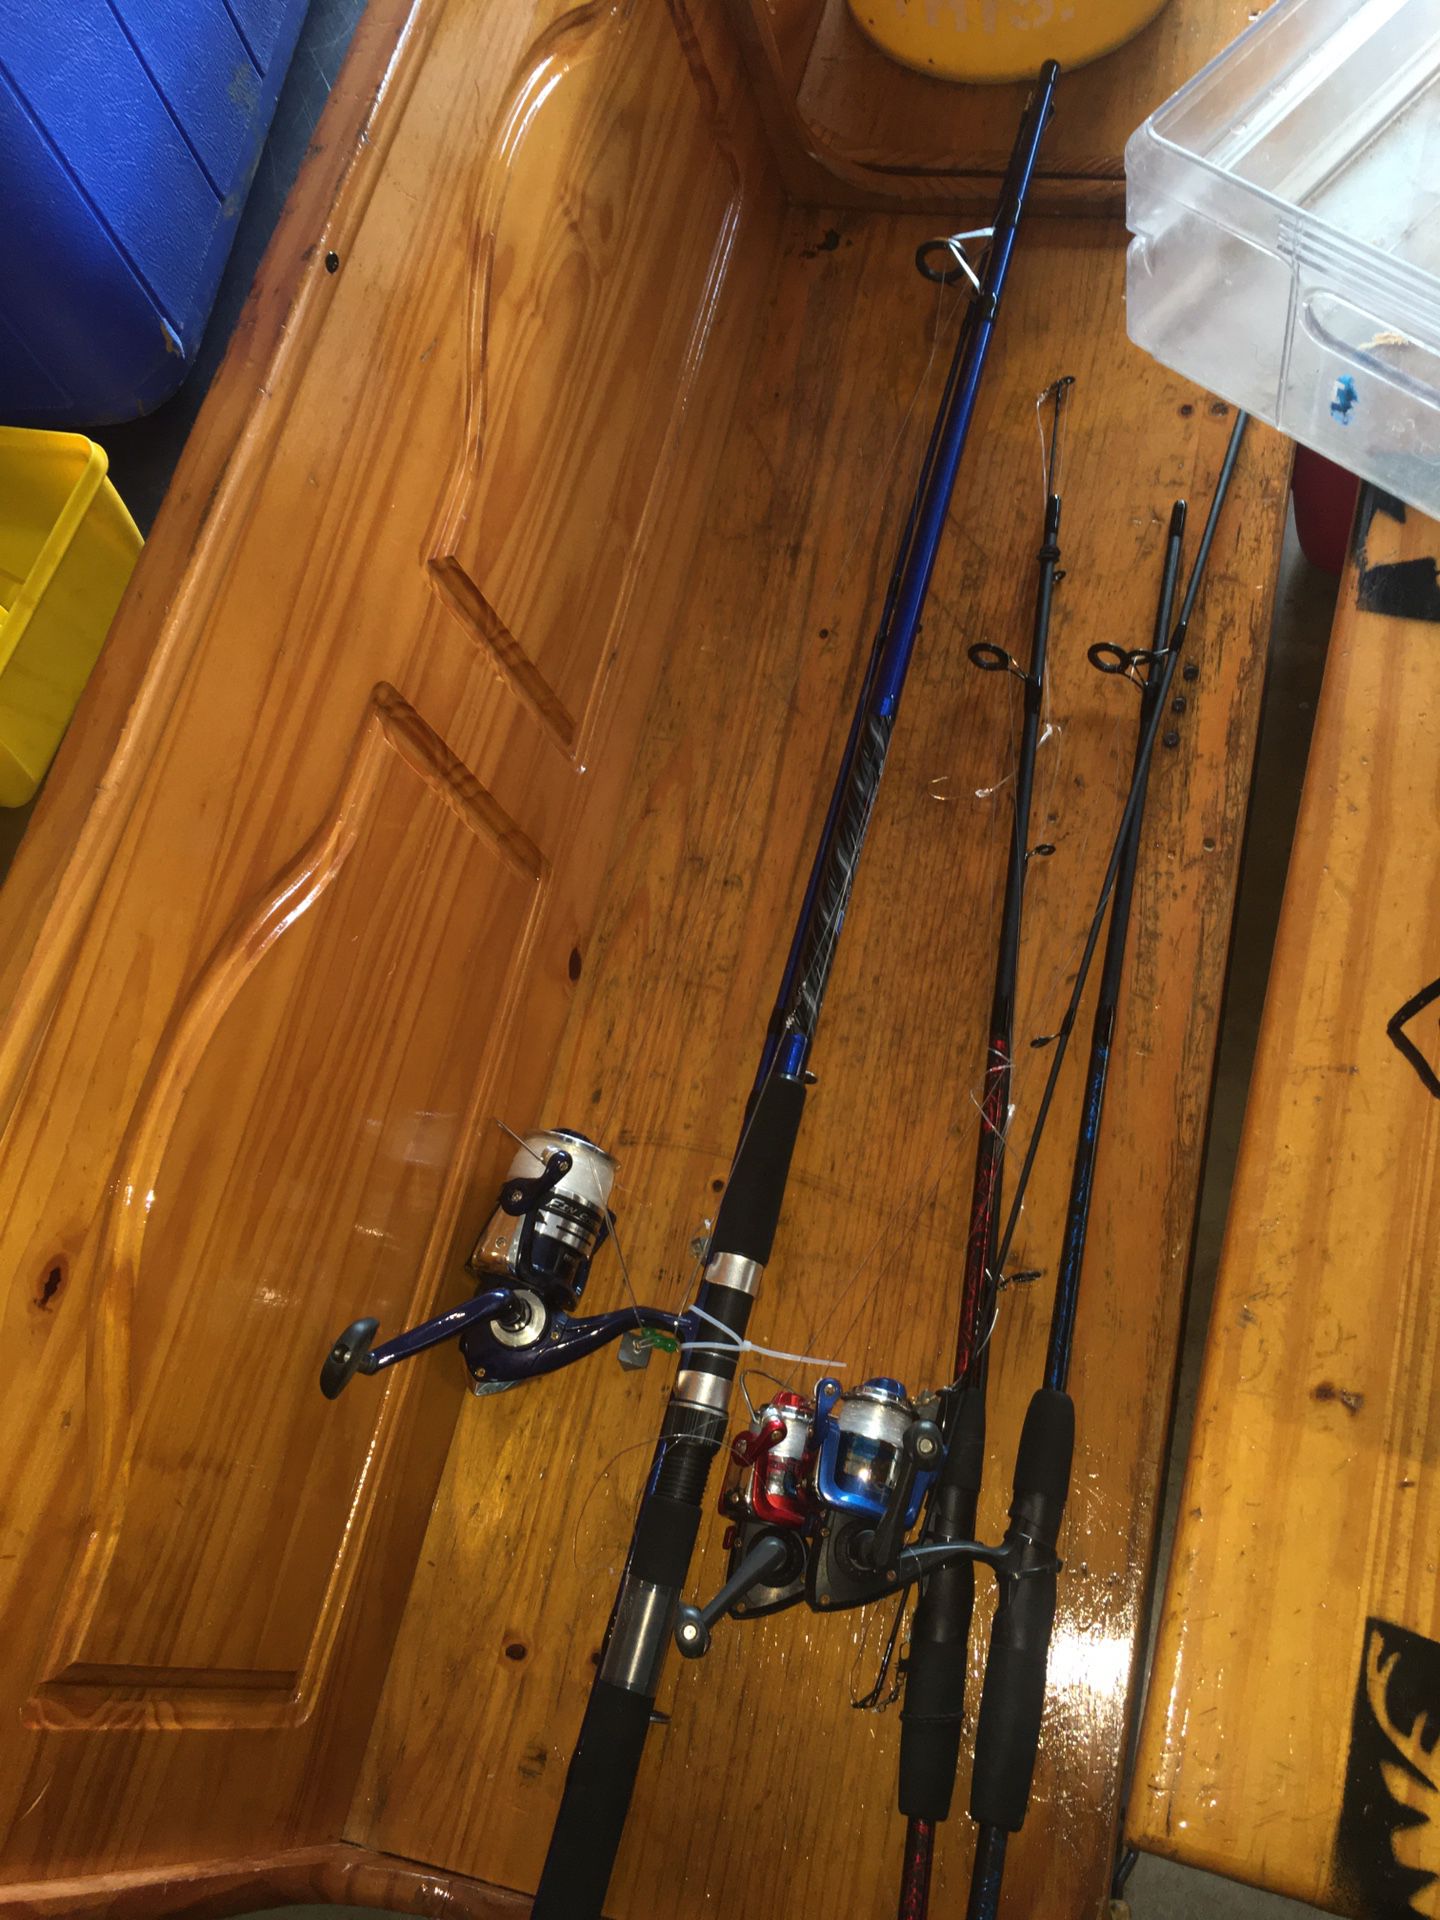 Fishing rods & tackle